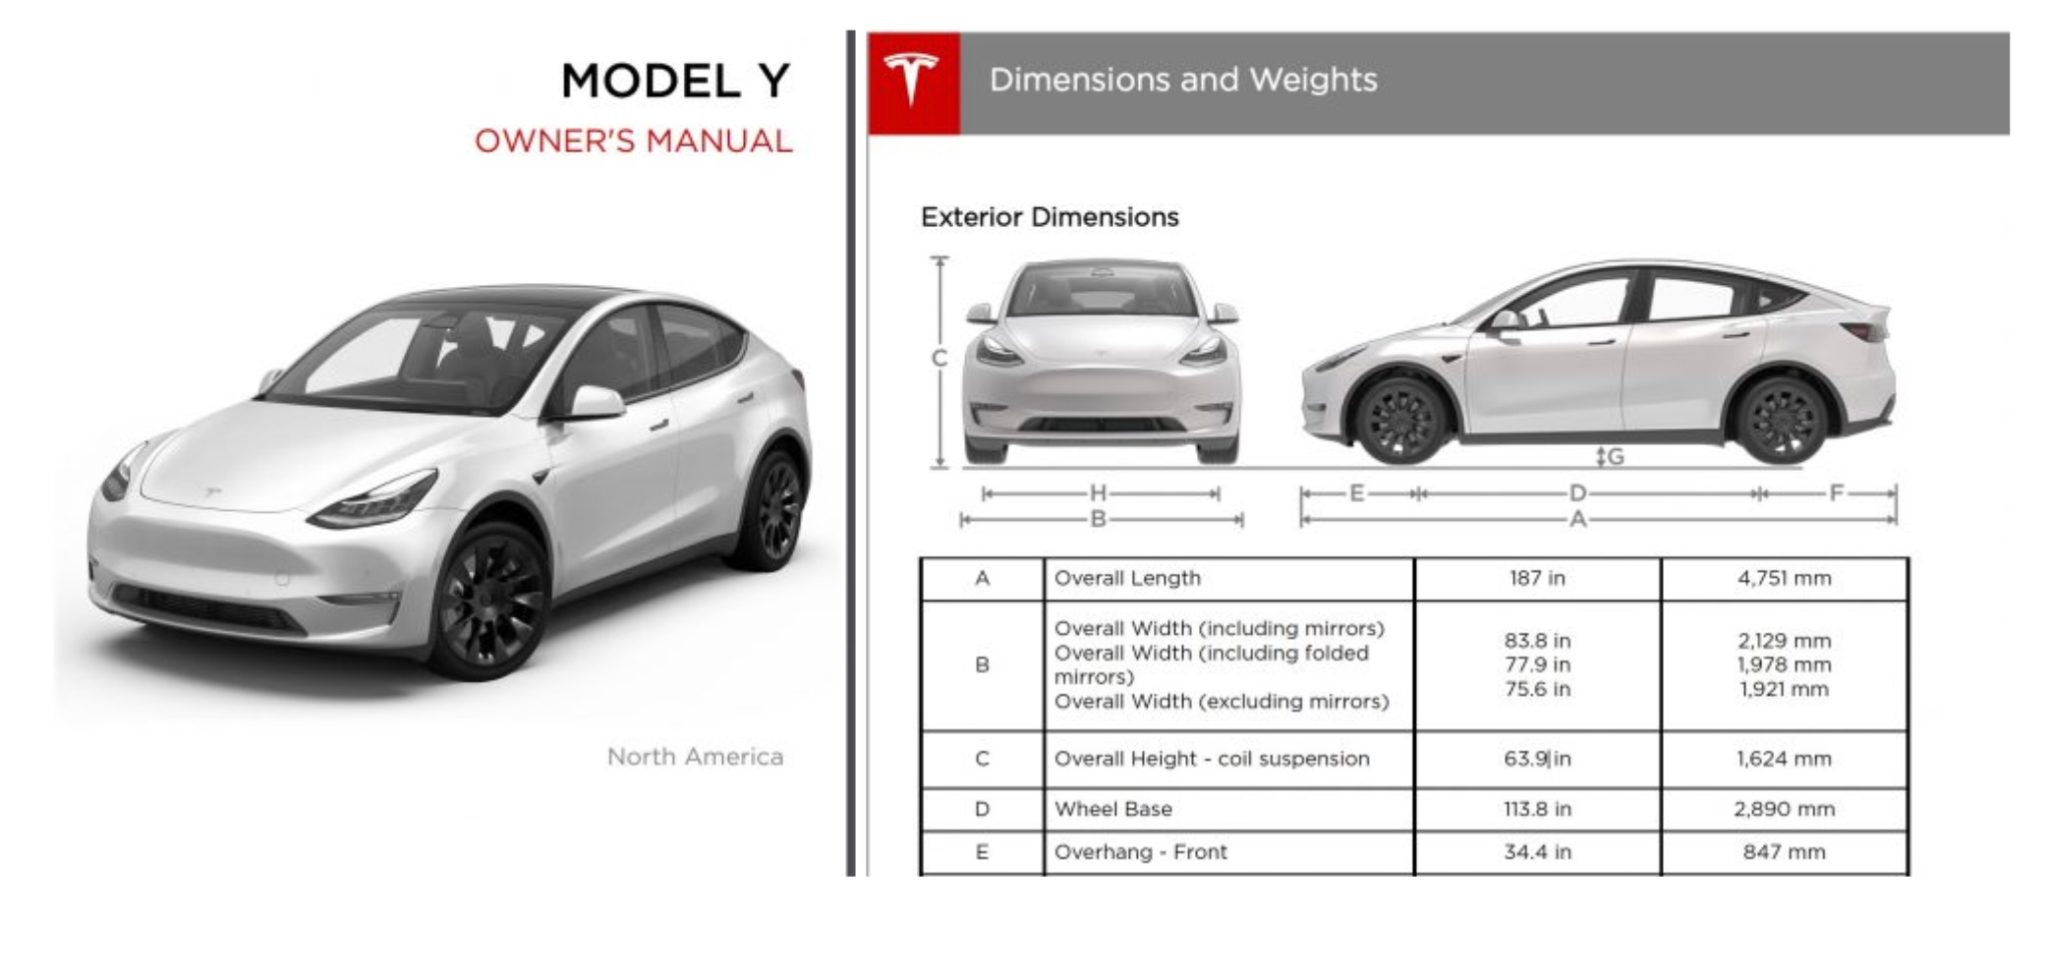 Tesla Now Offers Access to Manuals, Tools, and Repair Info for Free